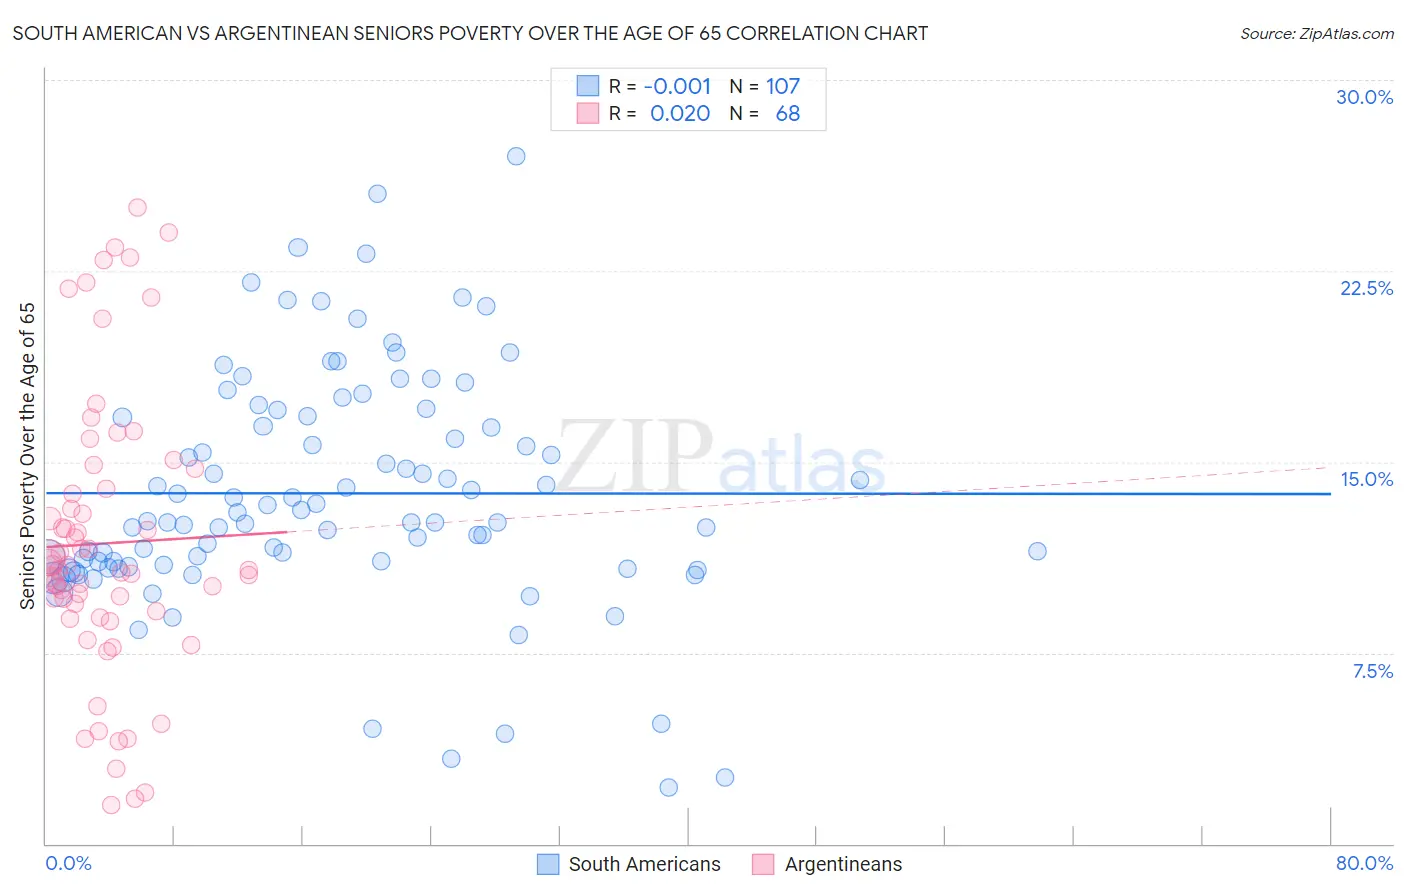 South American vs Argentinean Seniors Poverty Over the Age of 65